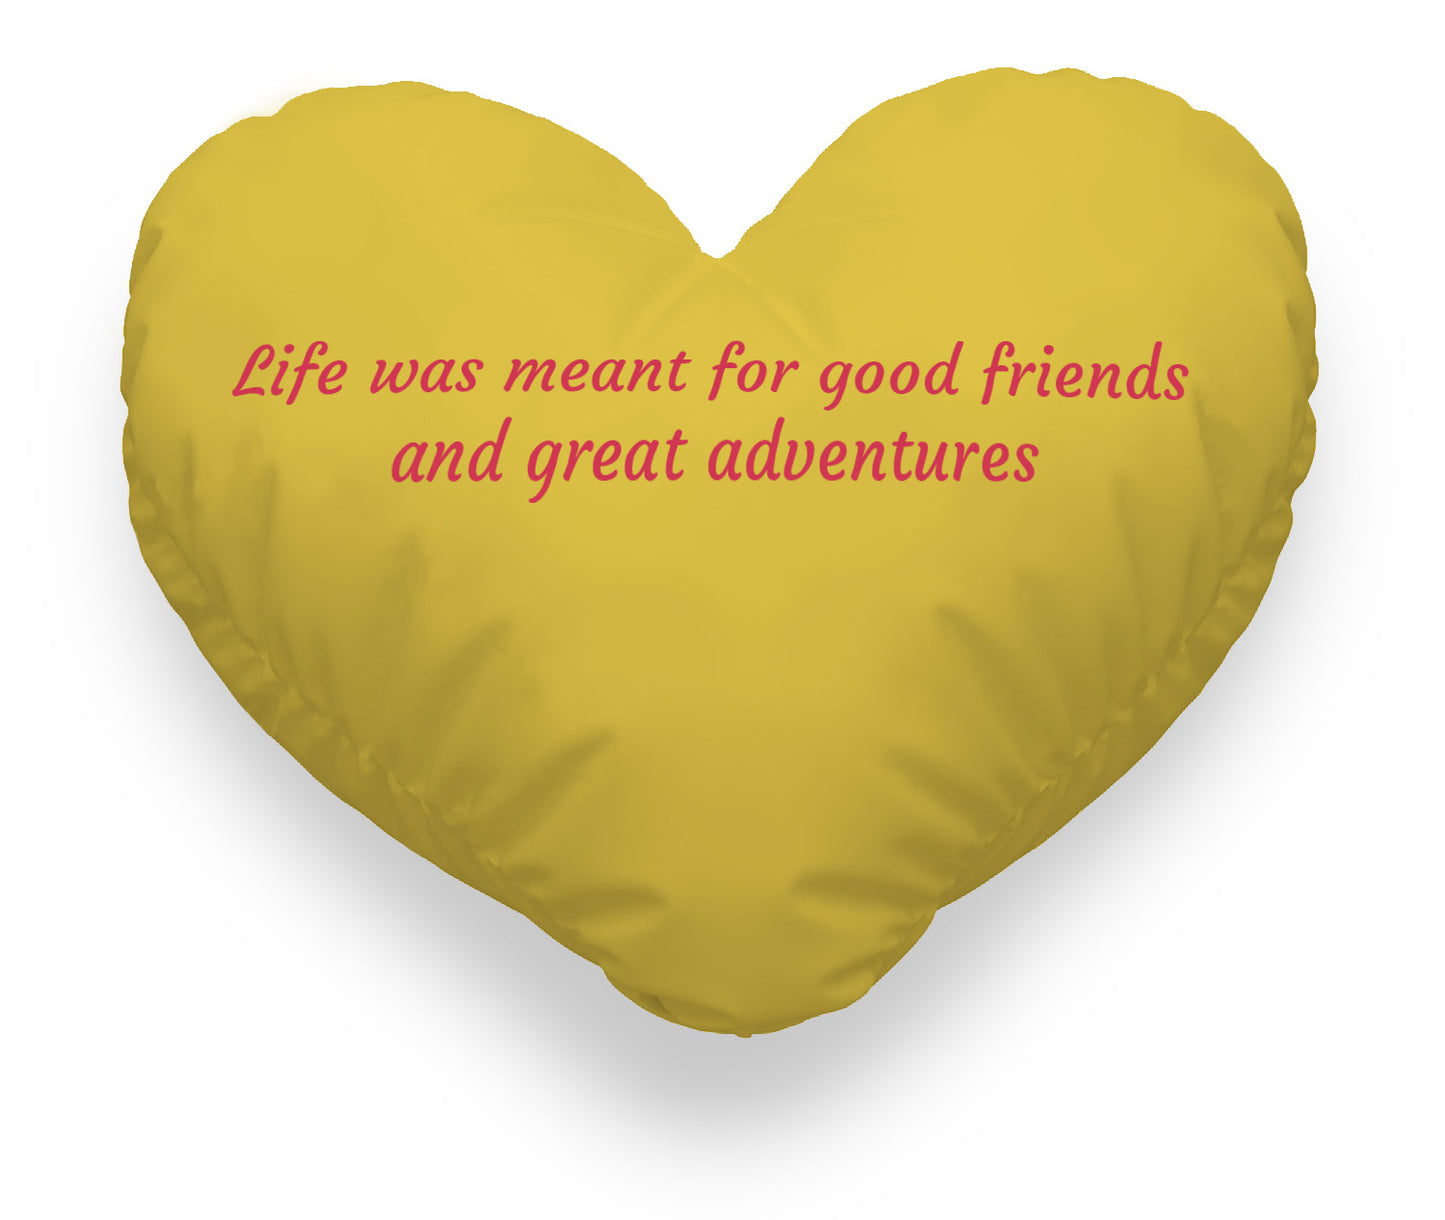 blue heart cushion. yellow text "life was meant for good friends and great adventures".